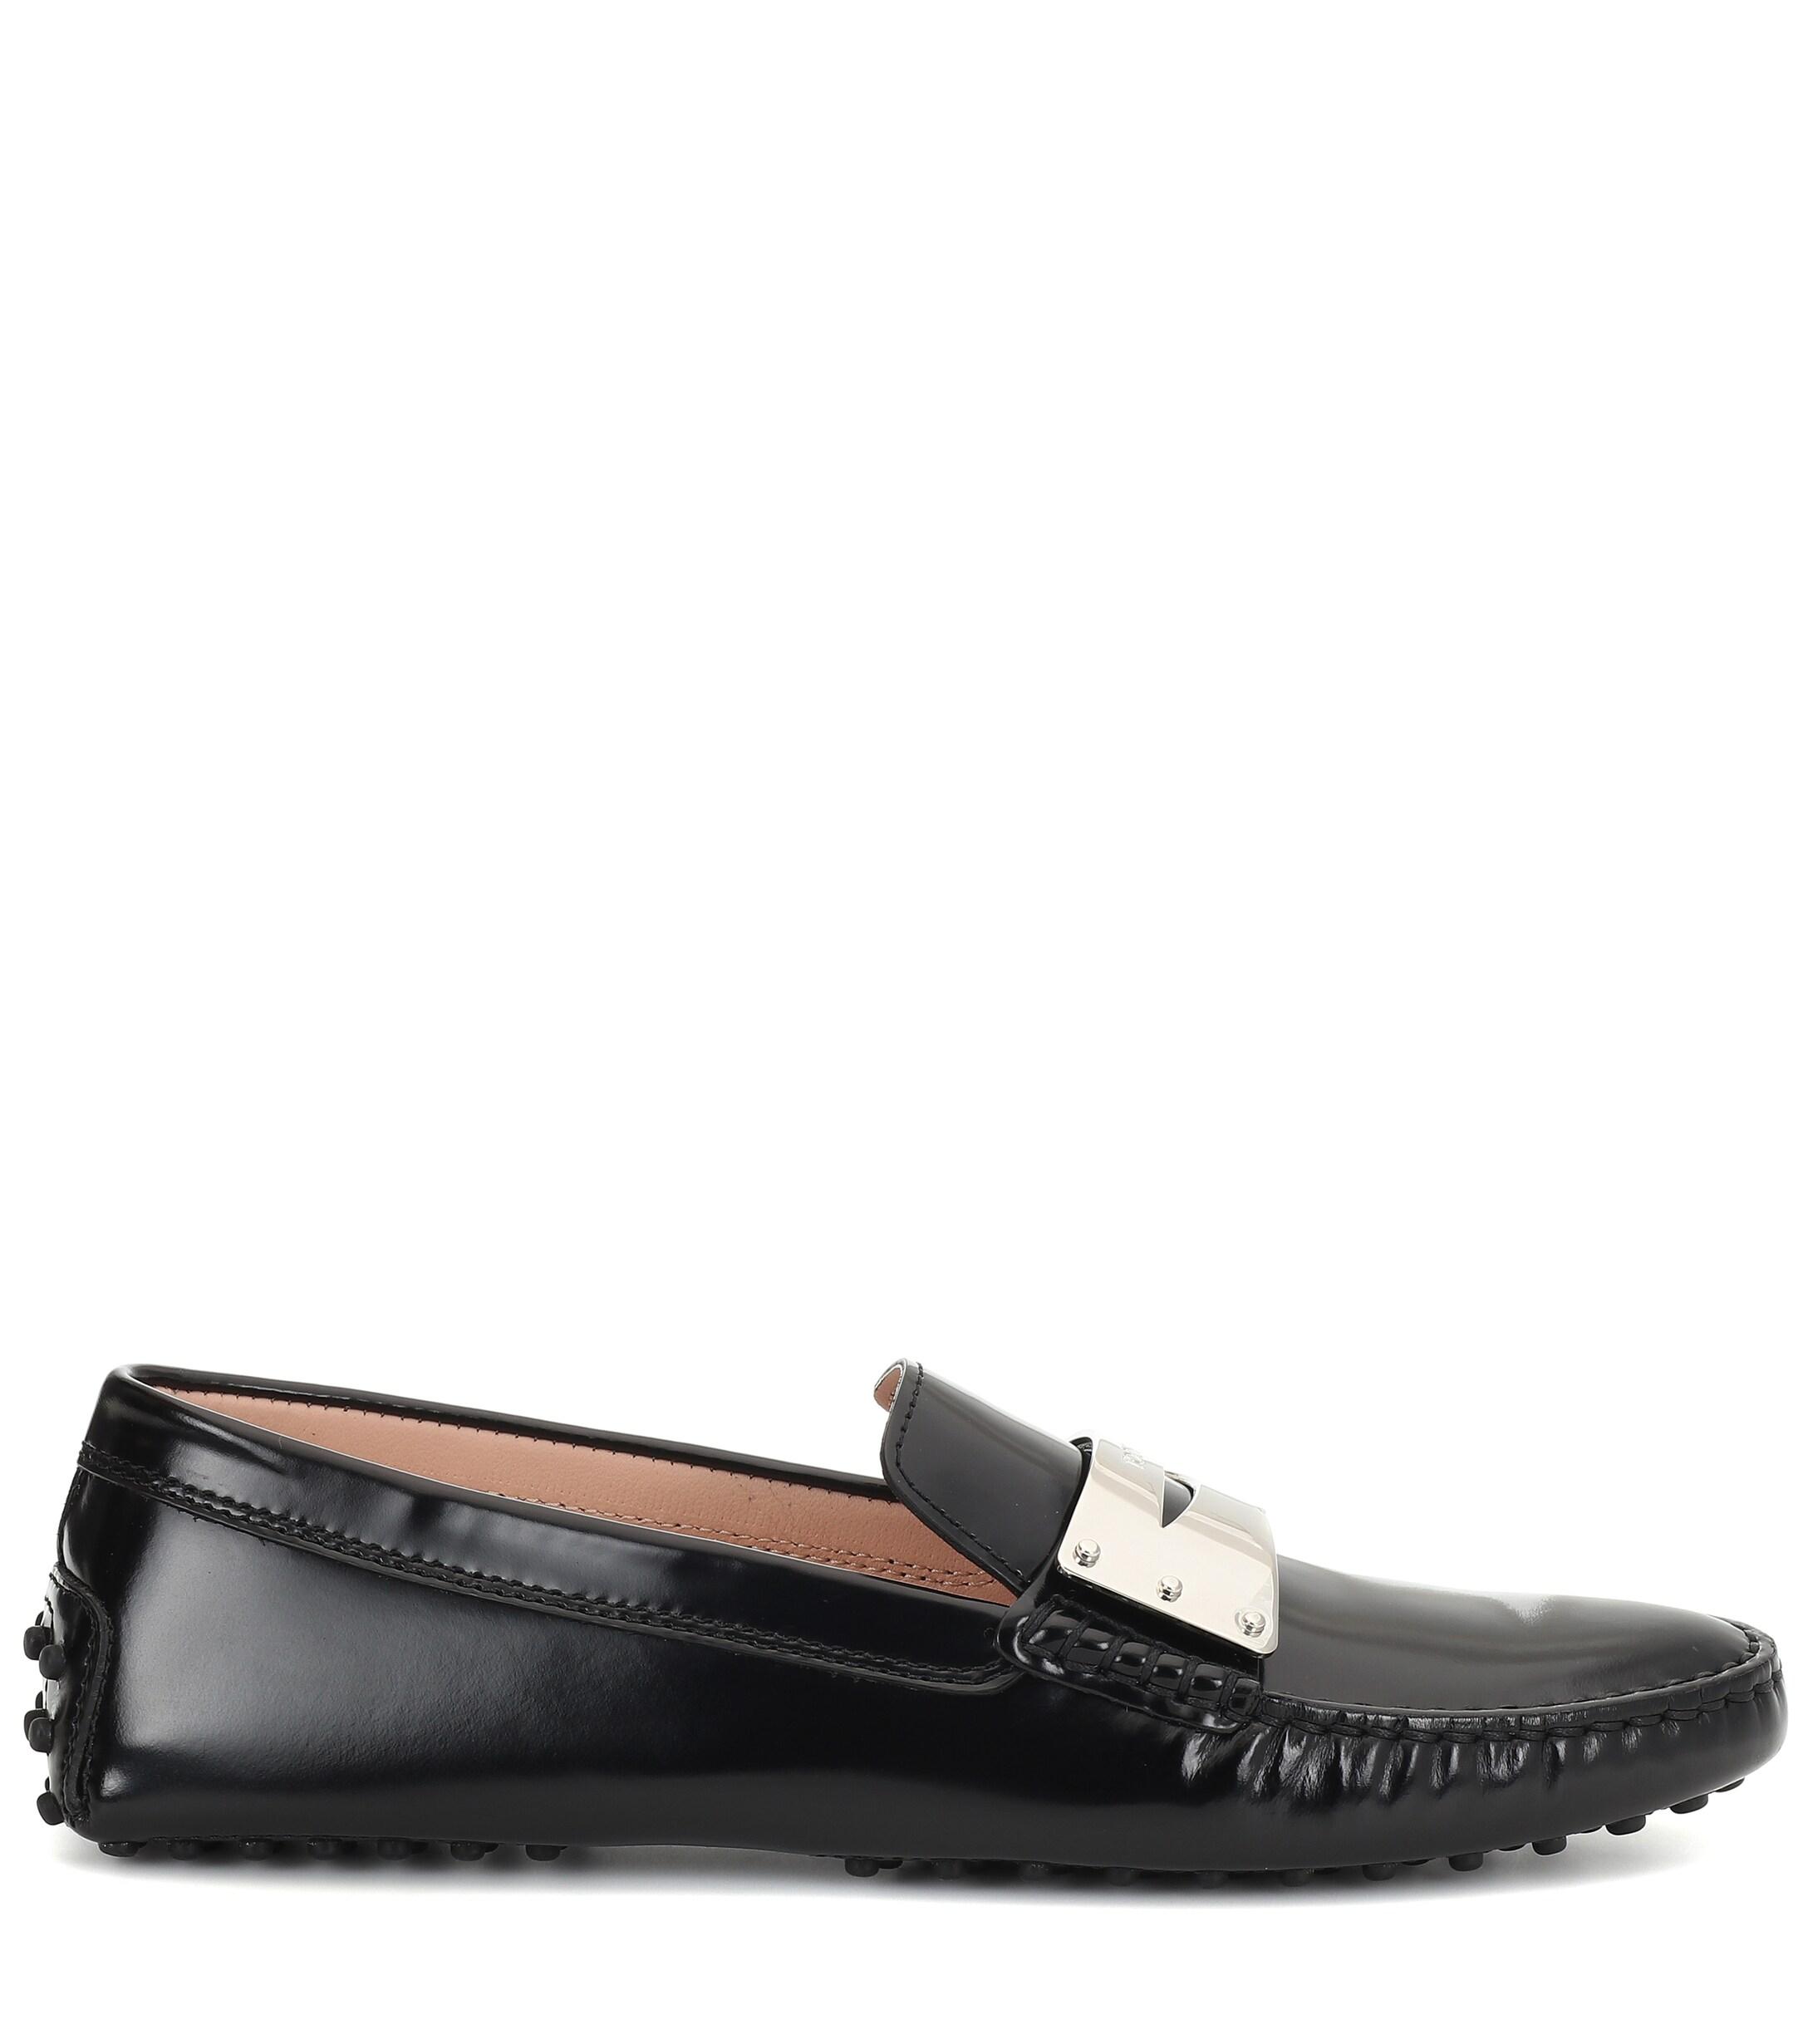 Tod's Gommino Patent Leather Moccasins in Black - Lyst